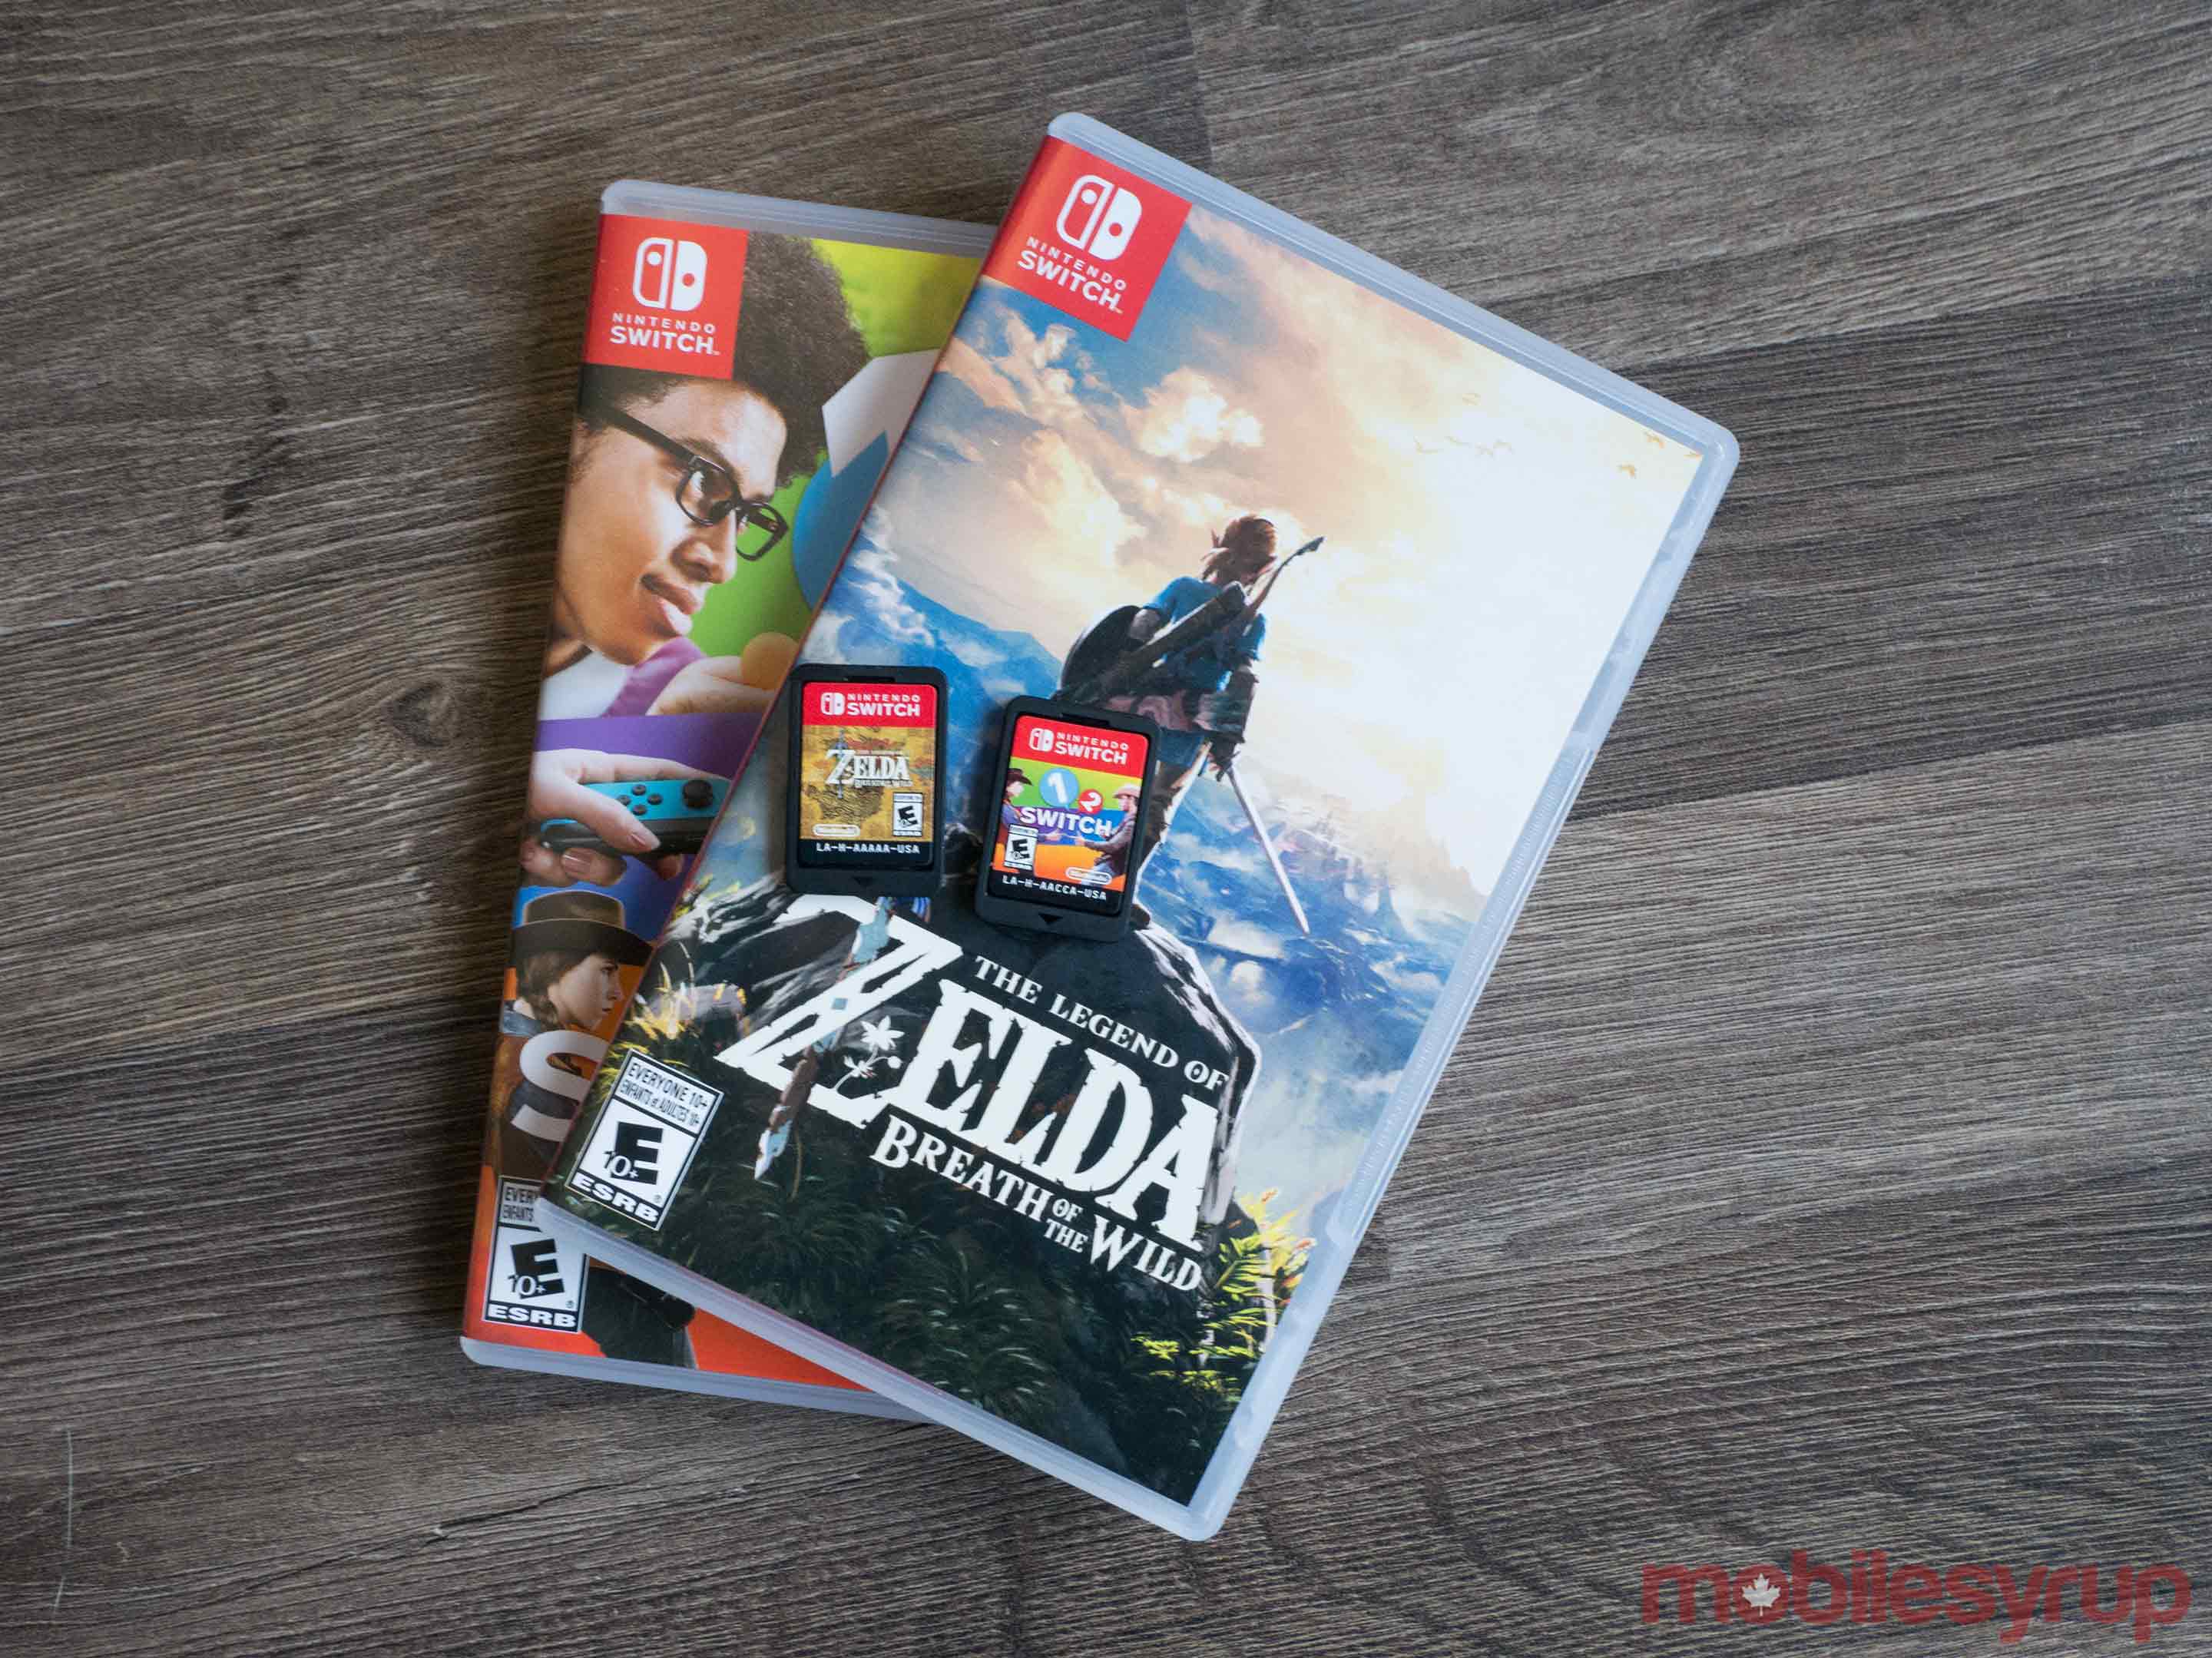 The Legend of Zelda Breath of the Wild and 1-2 Switch